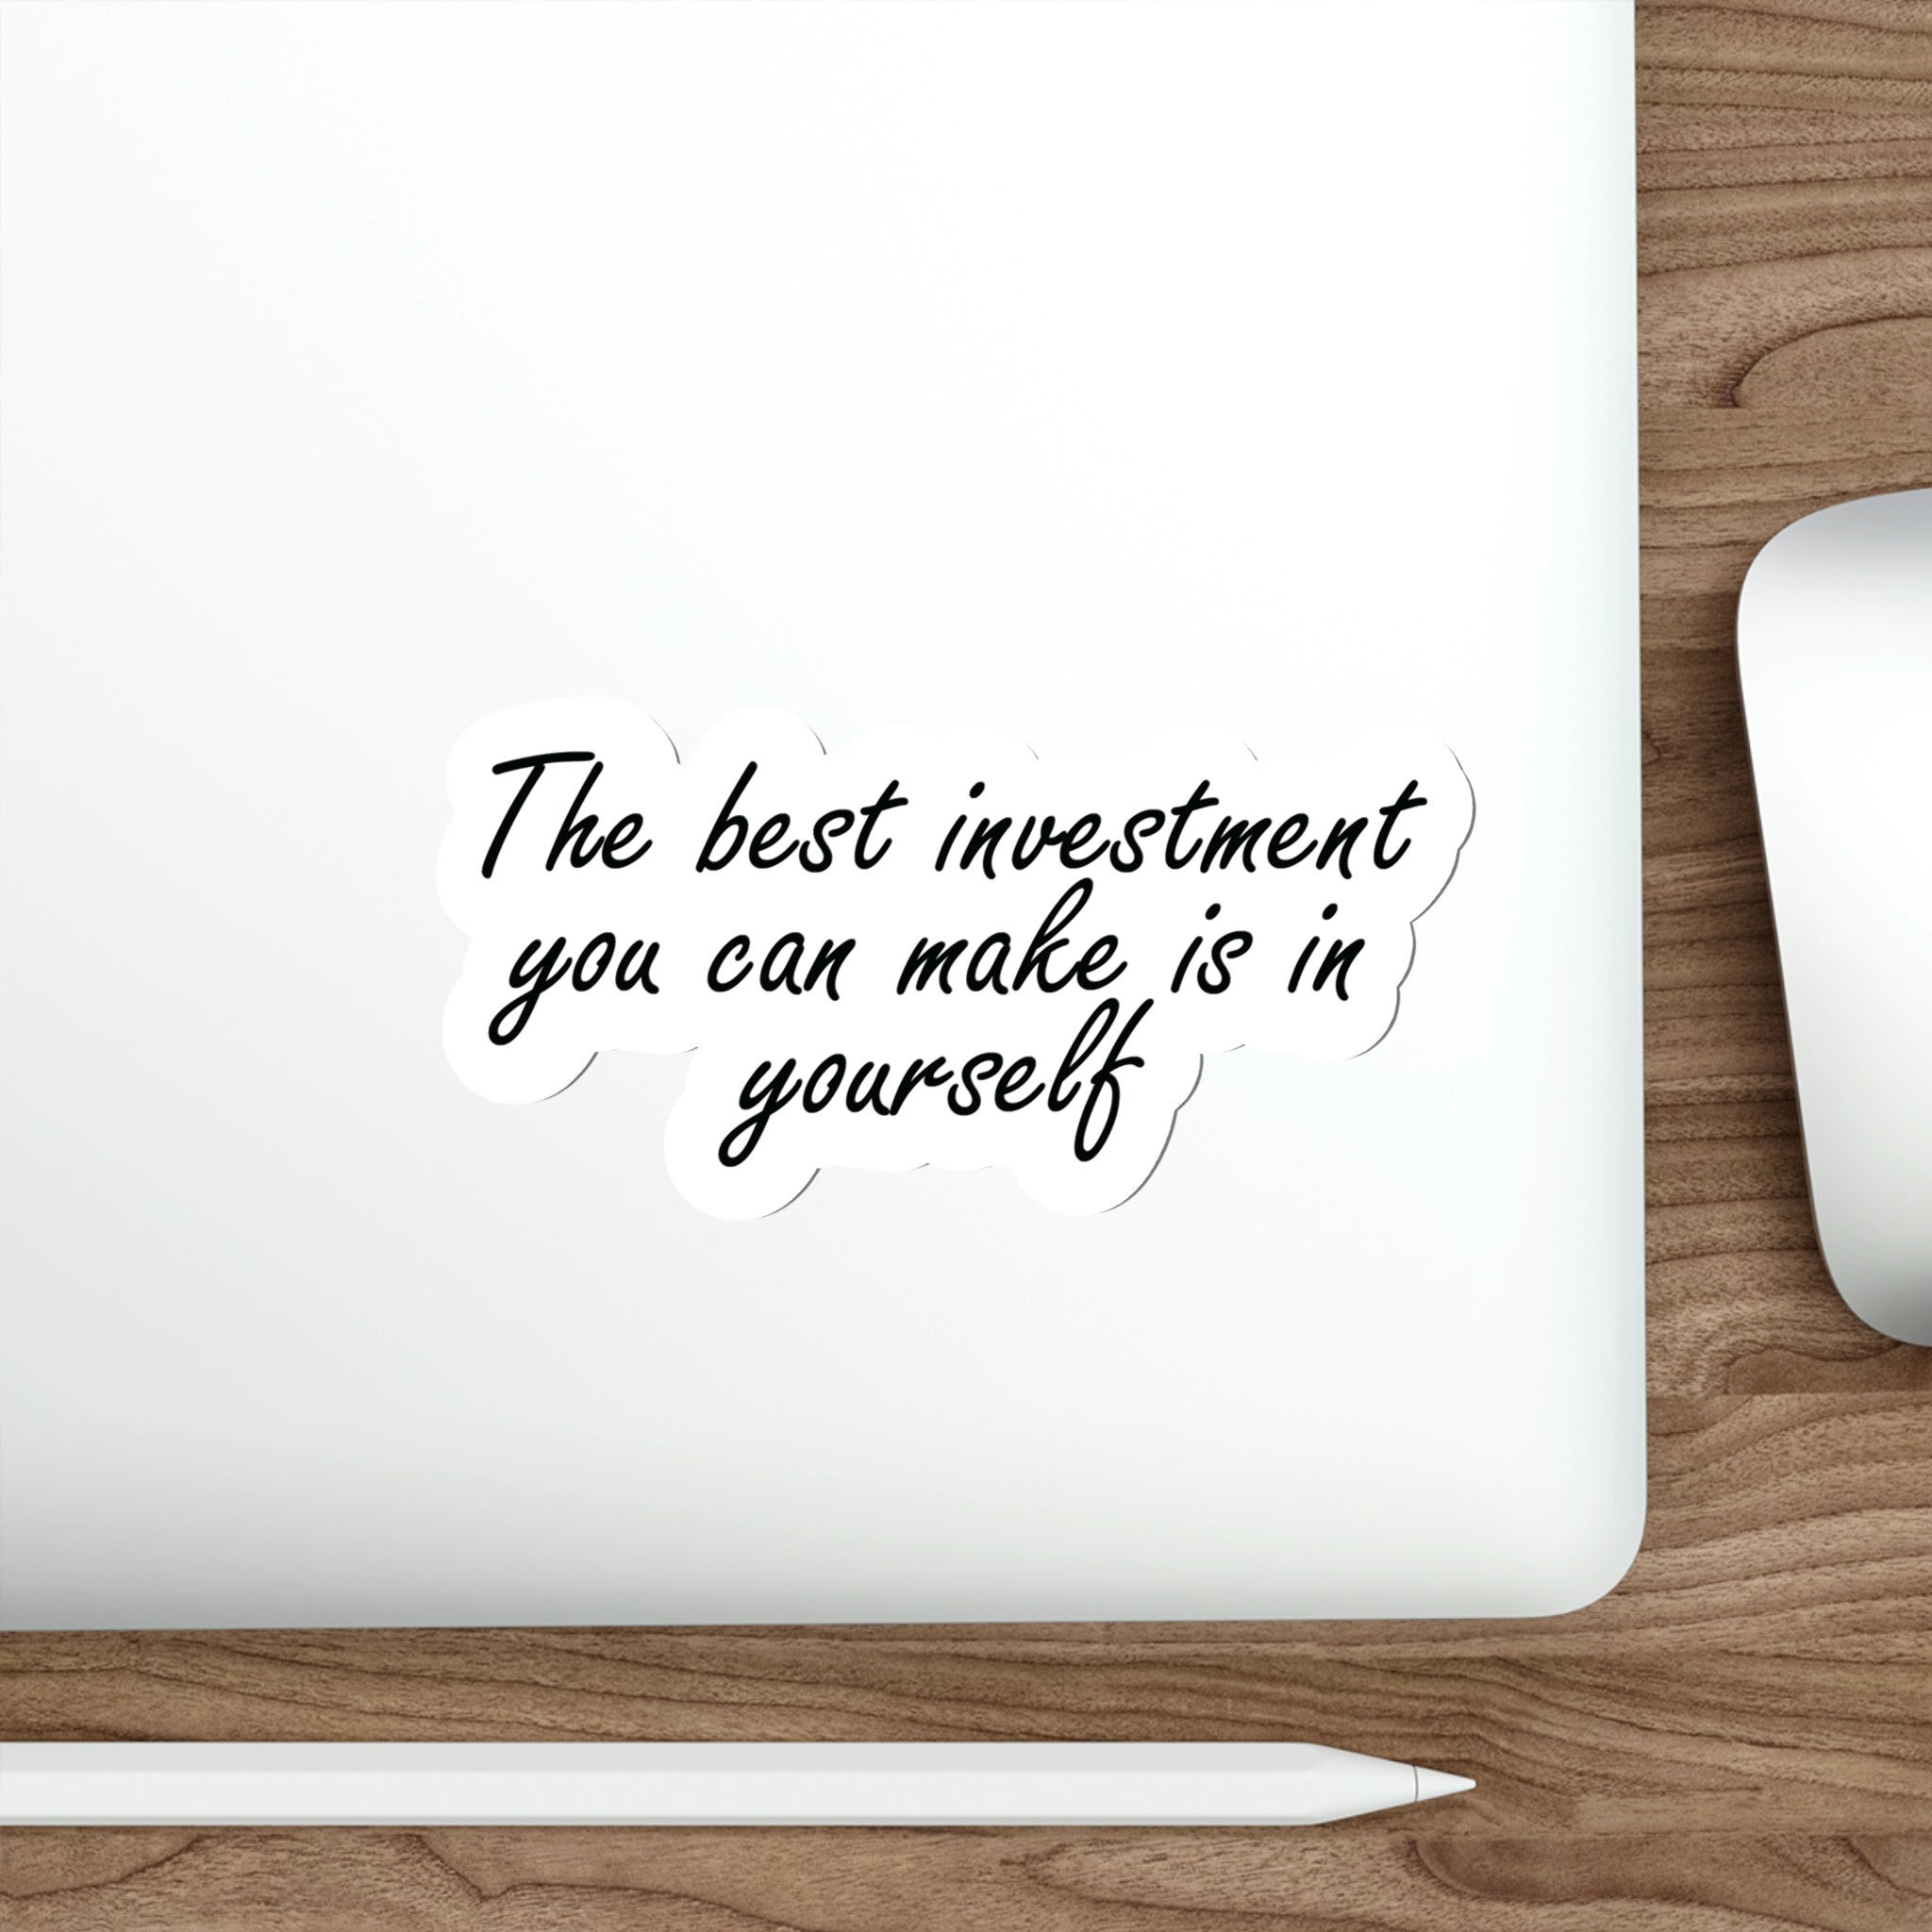 The best investment you can make is in yourself Sticker #size_6x6-inches